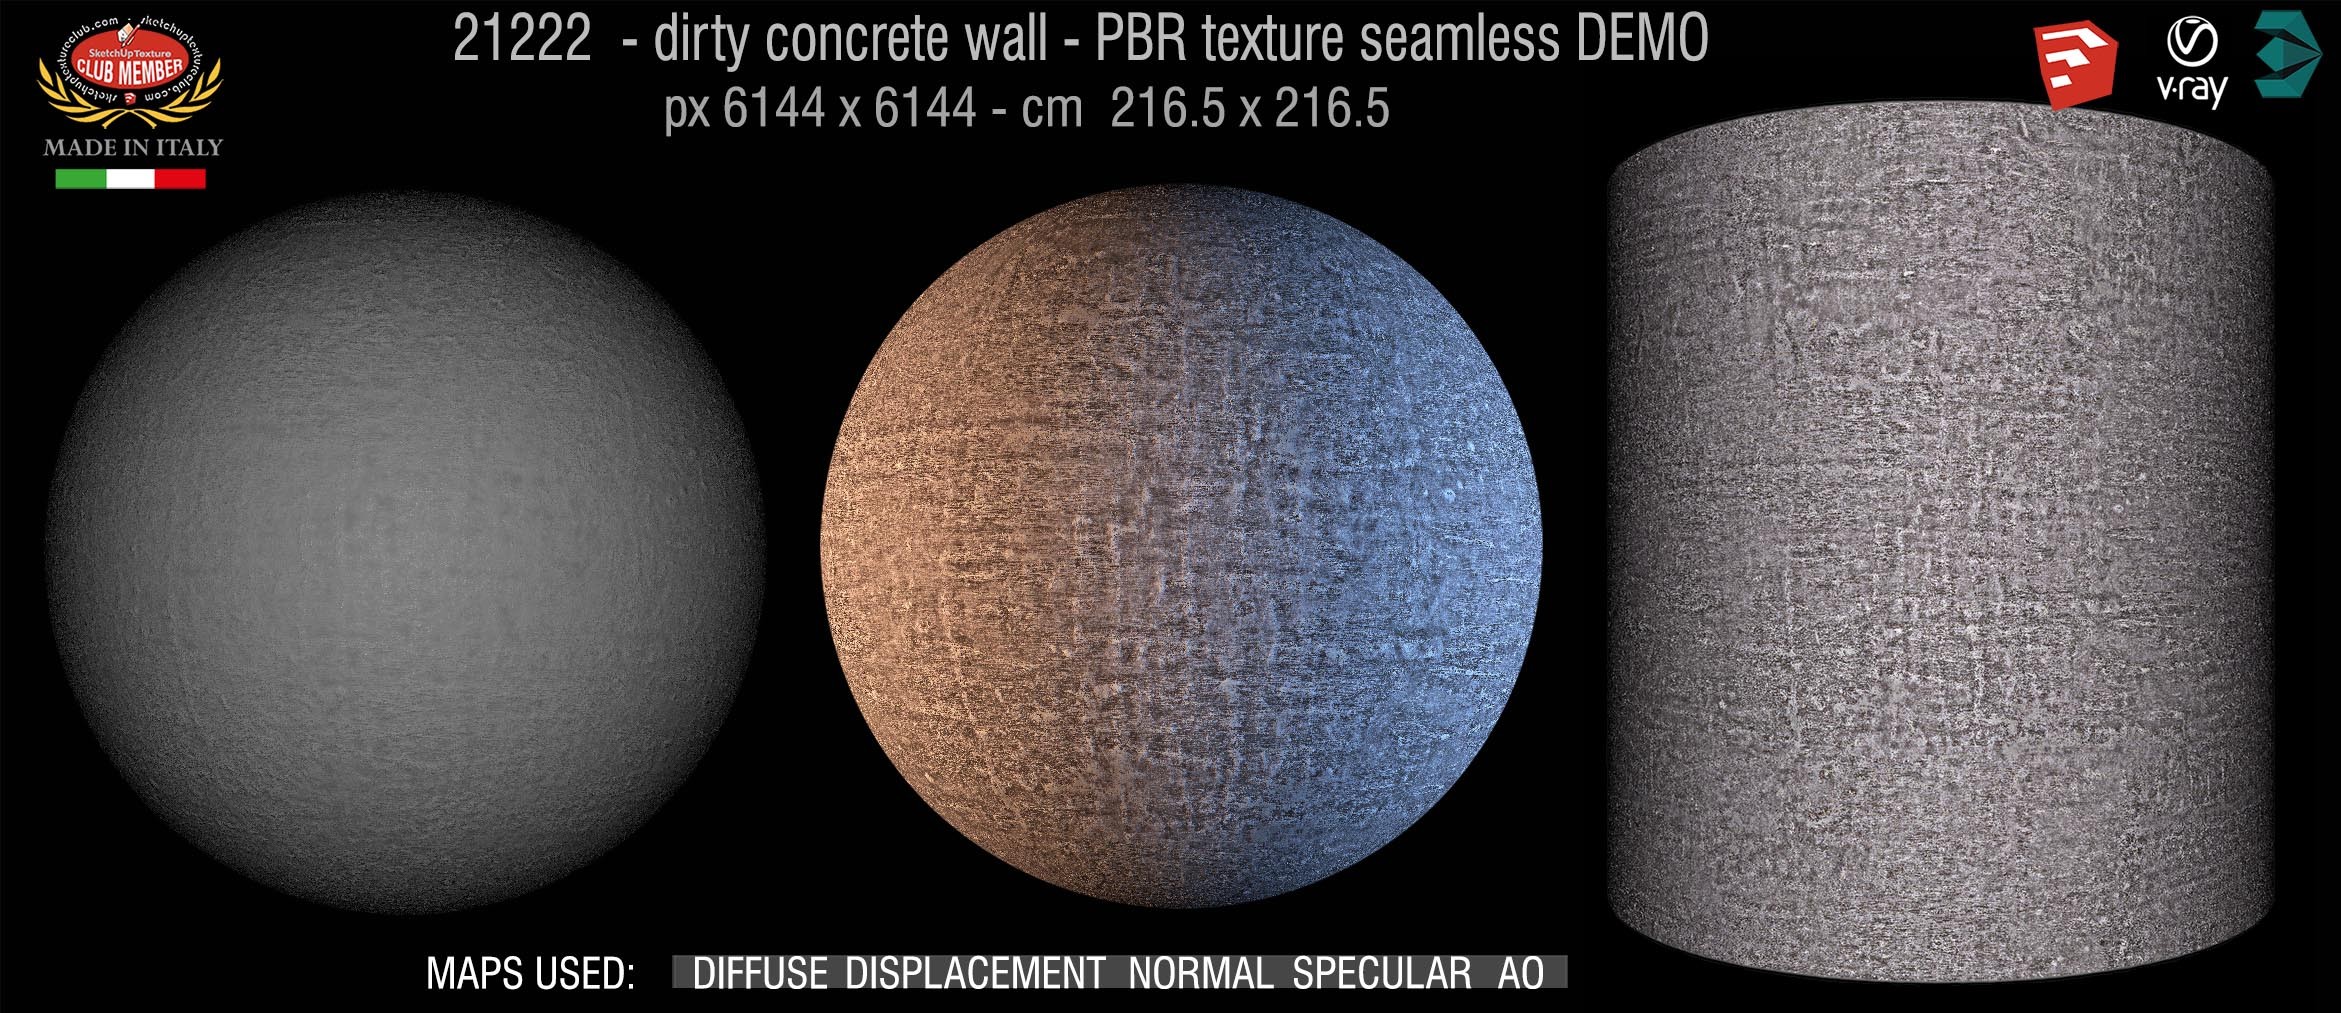 21222 dirty concrete wall PBR texture seamless DEMO